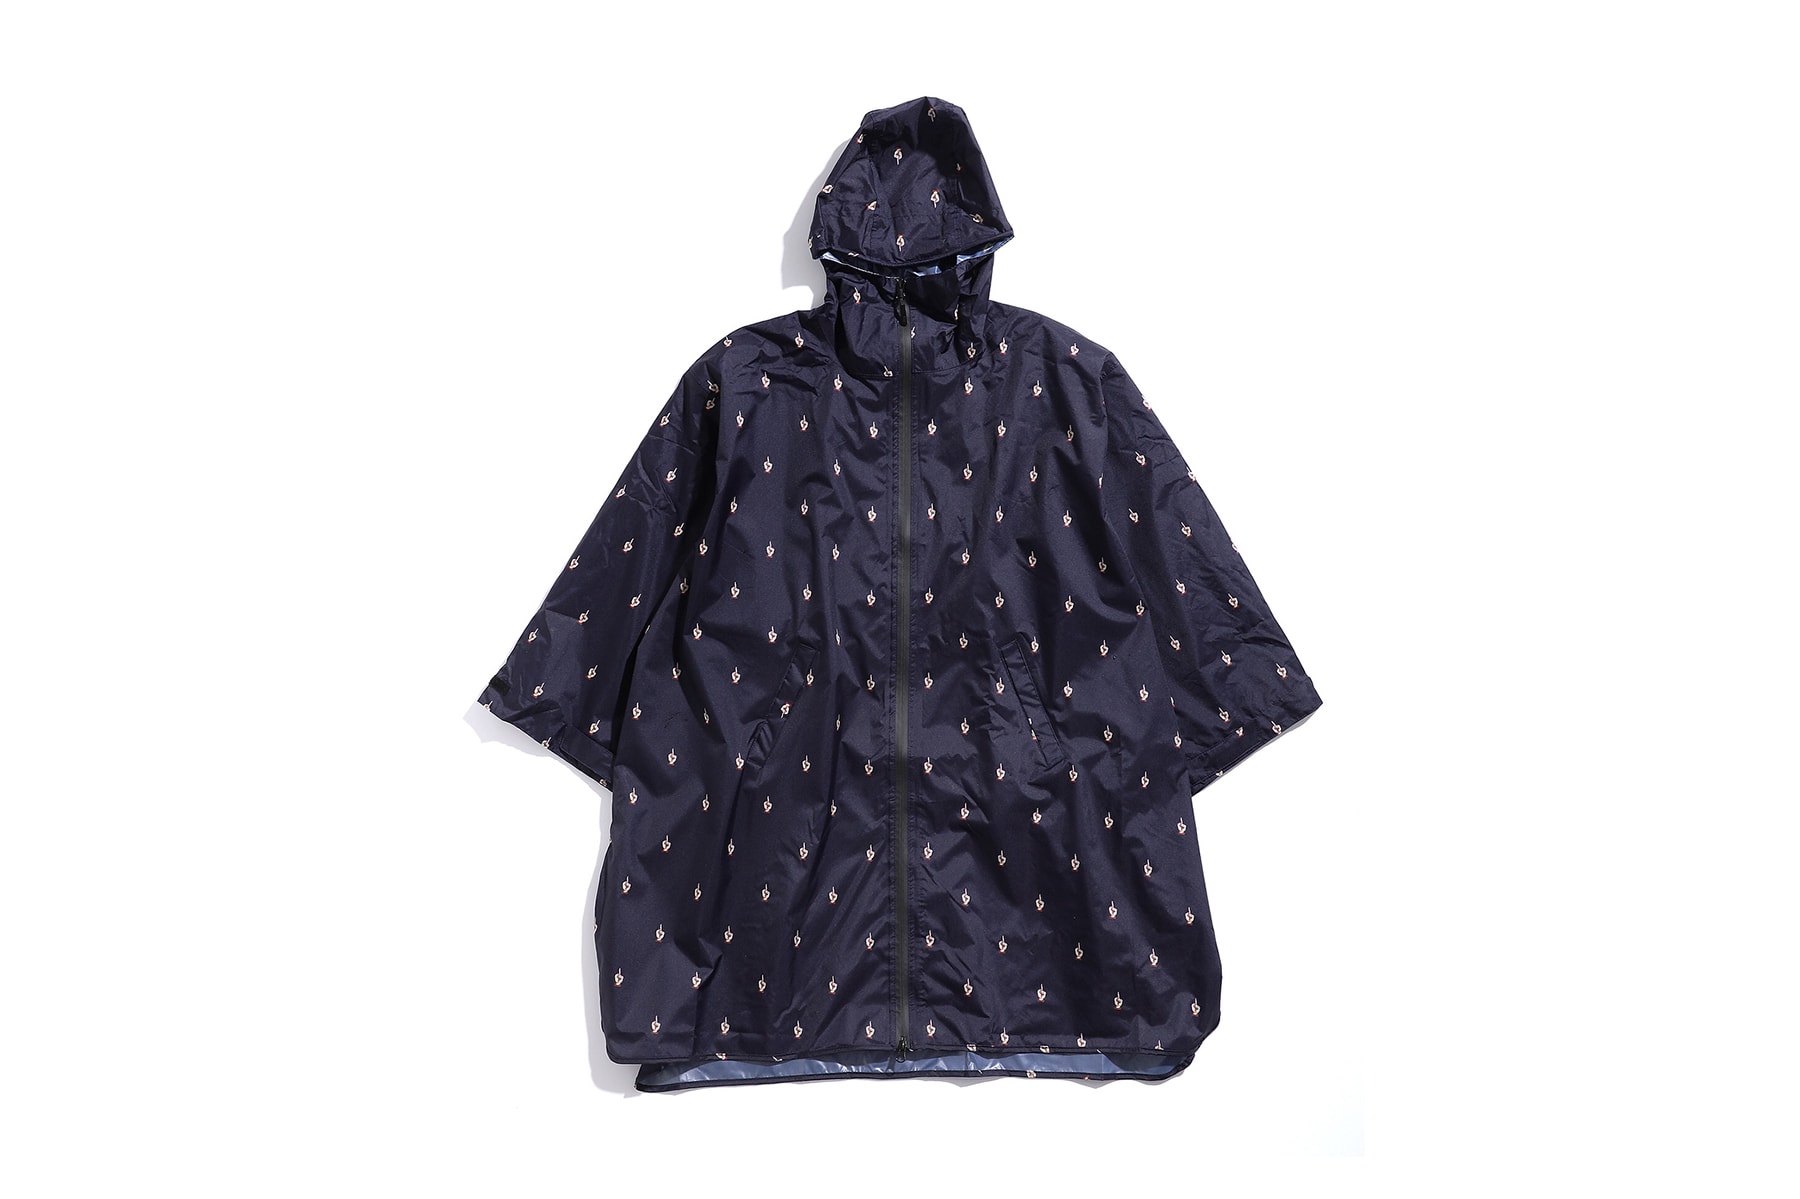 undercover kiu collaboration july 21 2018 printed raincoat blue navy middle finger graphic zipper pocket